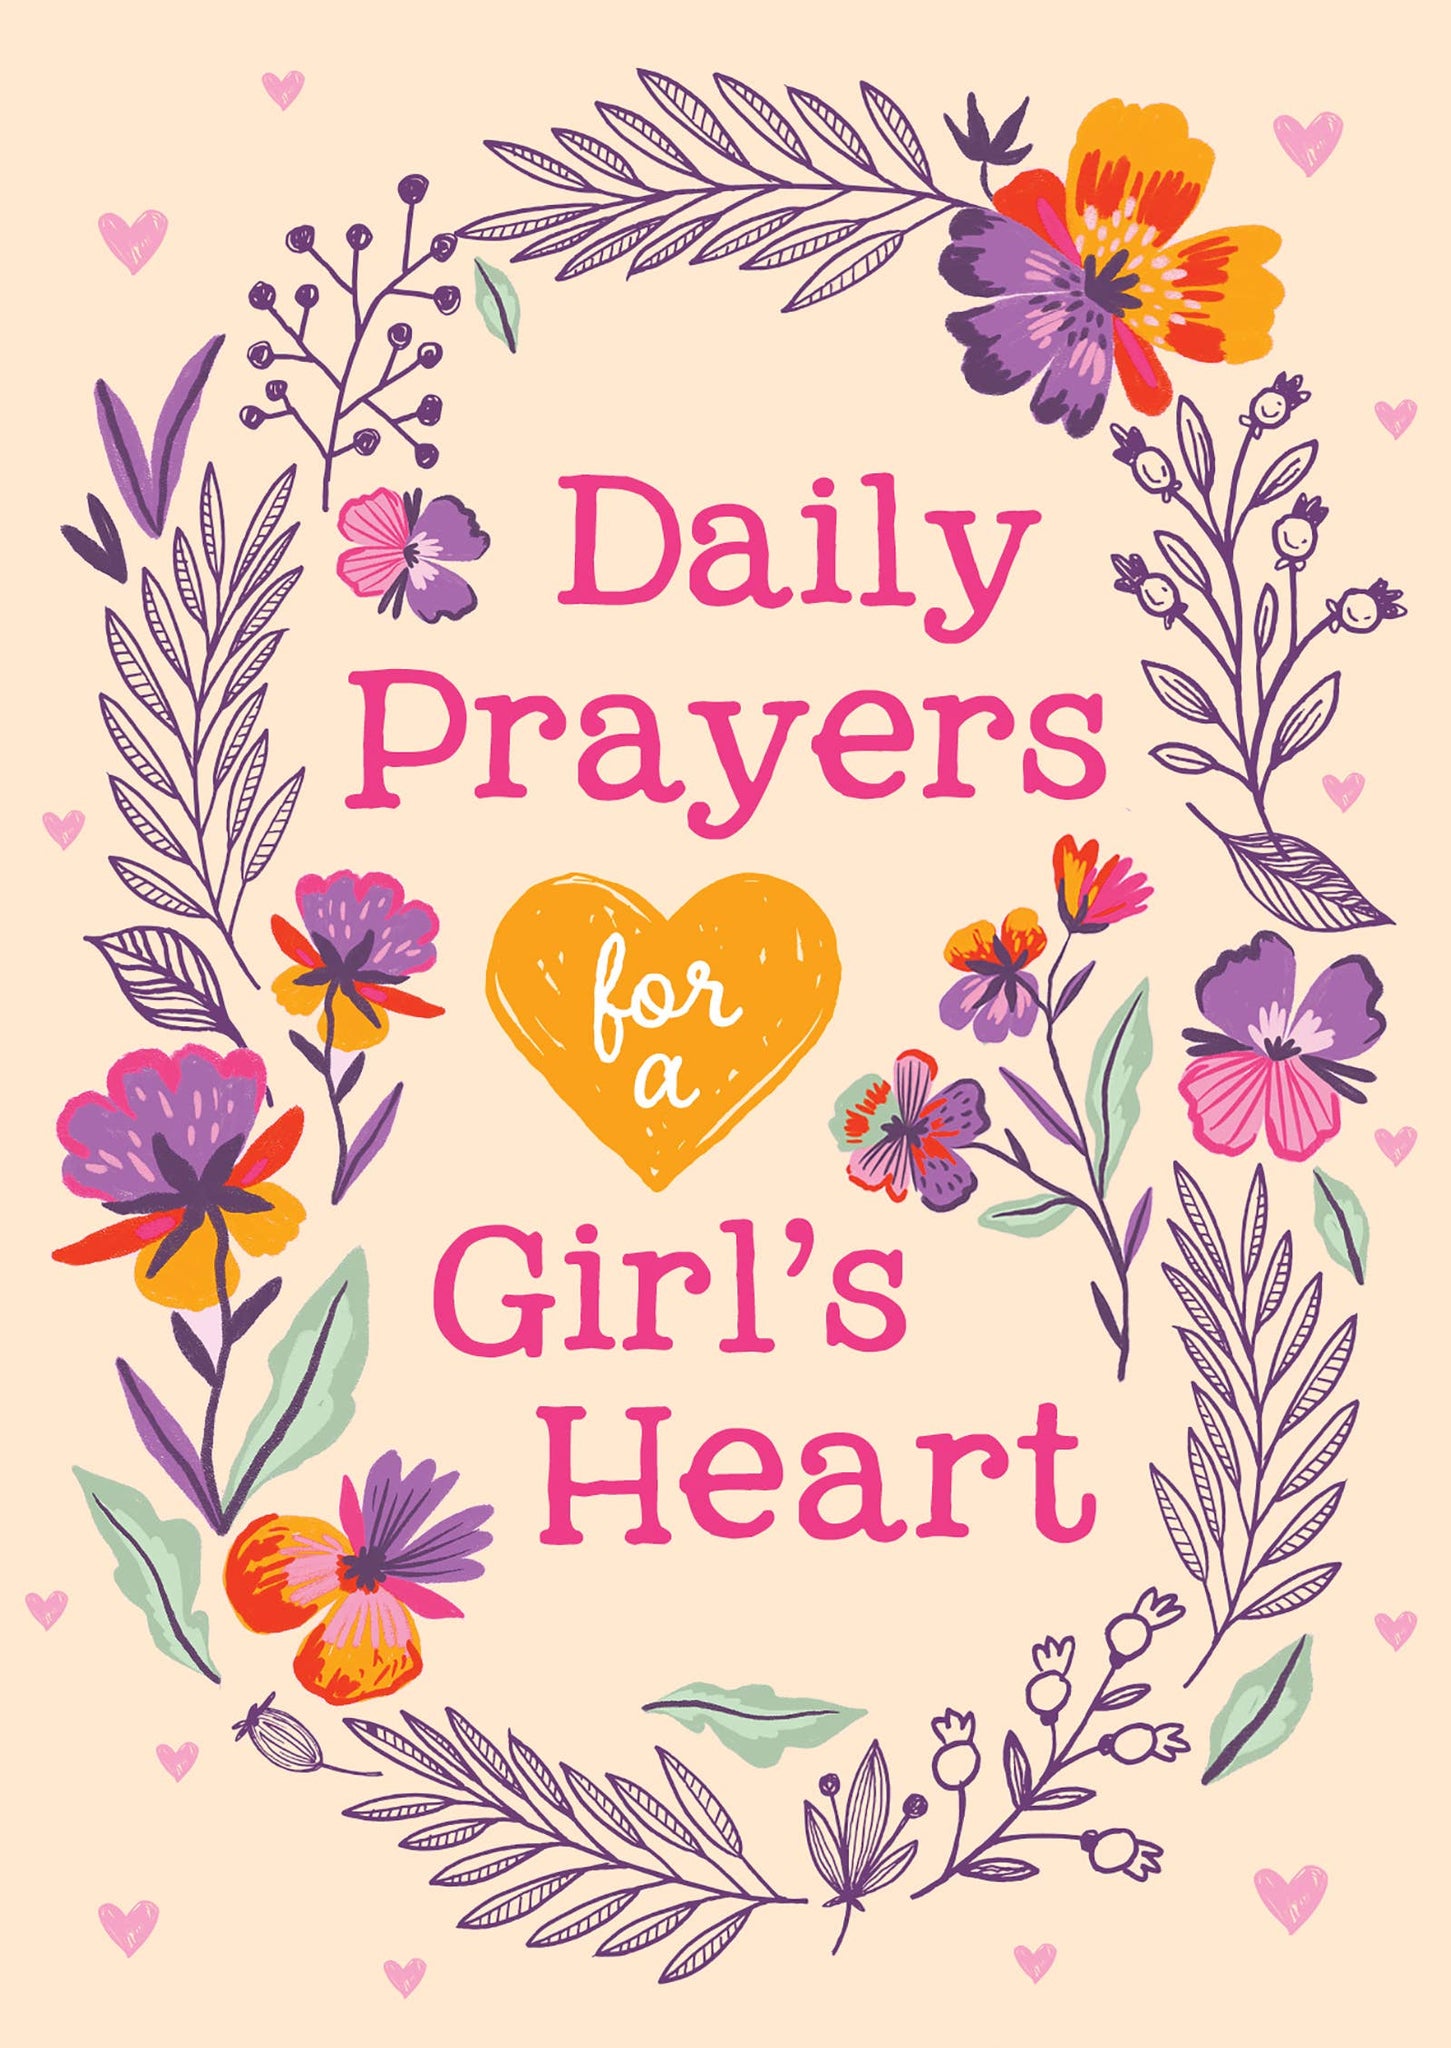 Daily Prayers for a Girl's Heart